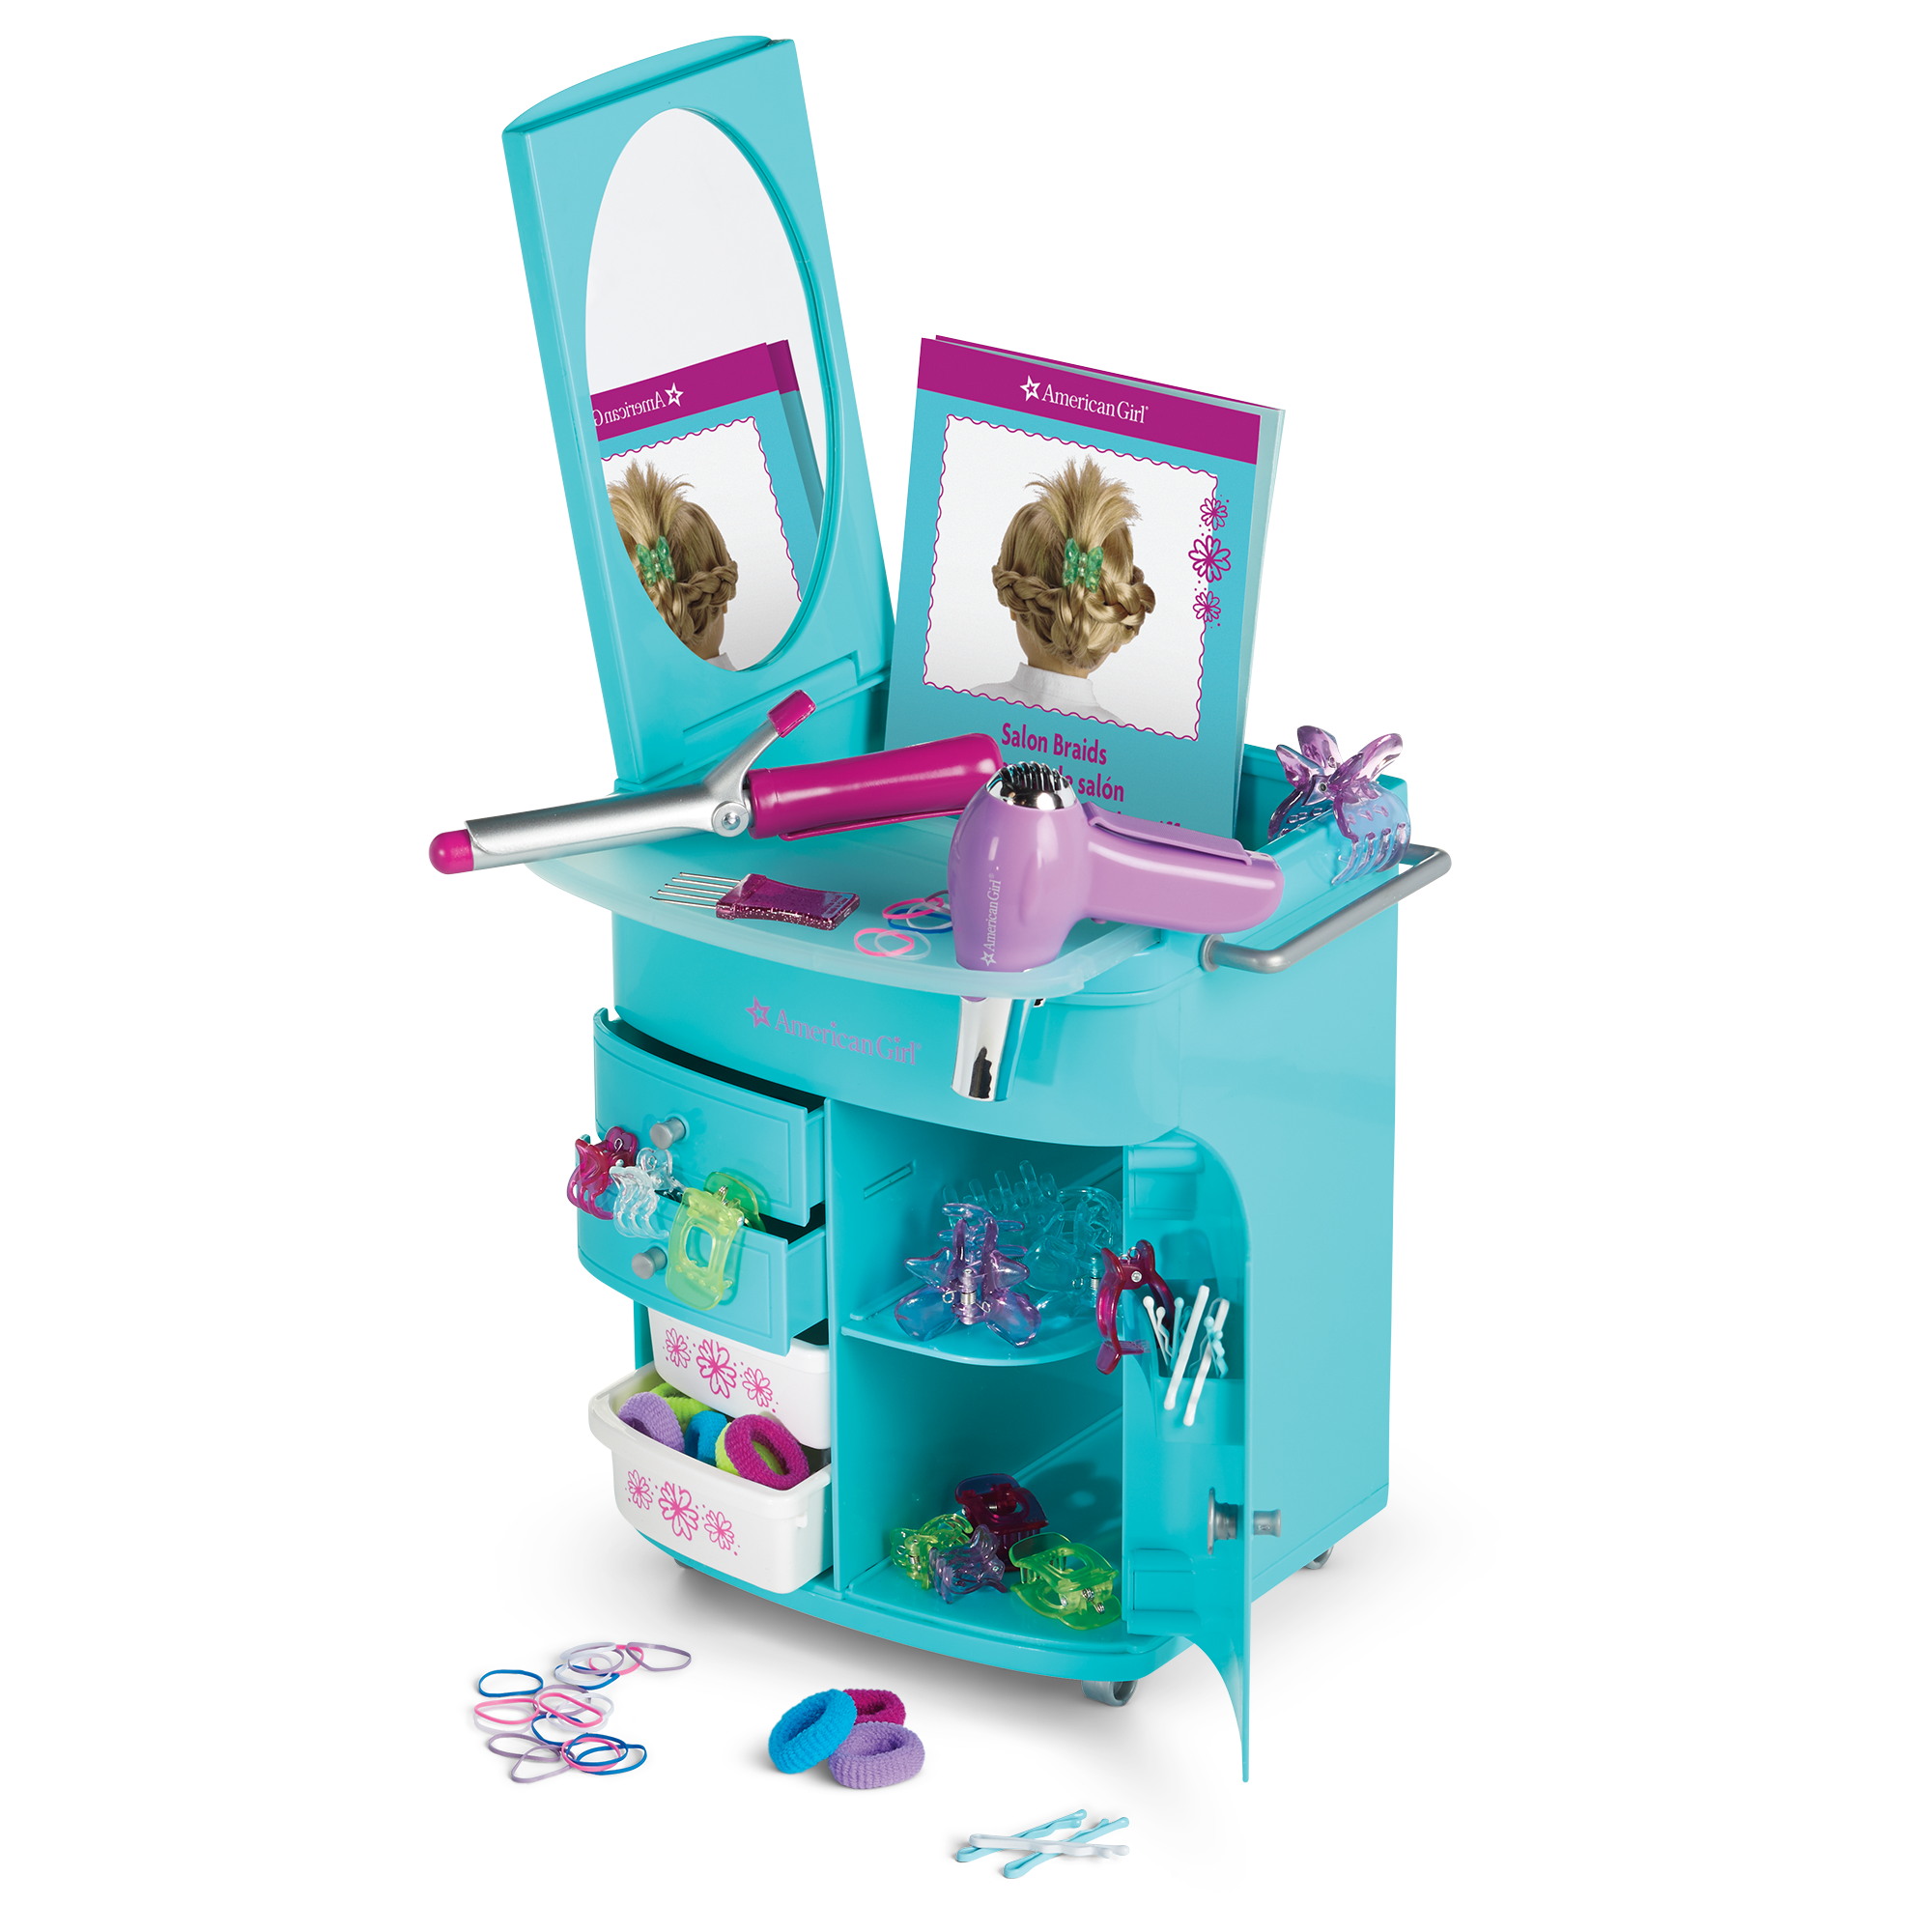 Truly Blue Hairstyling Caddy, American Girl Wiki